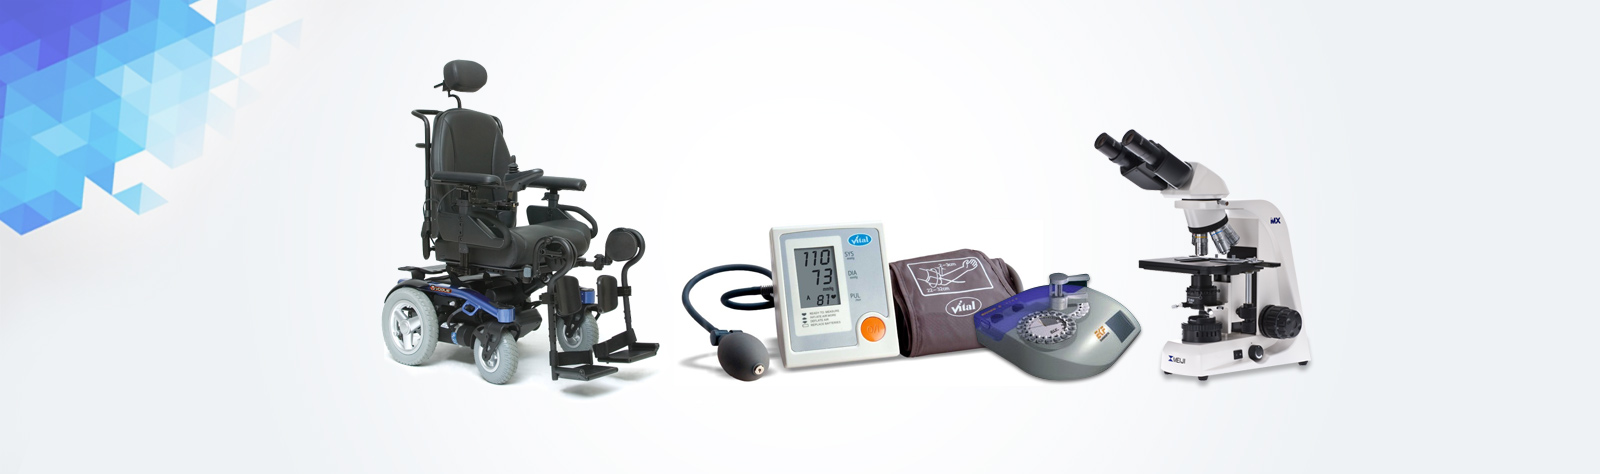 Shop Medical Equipments and Lab Supplies Online